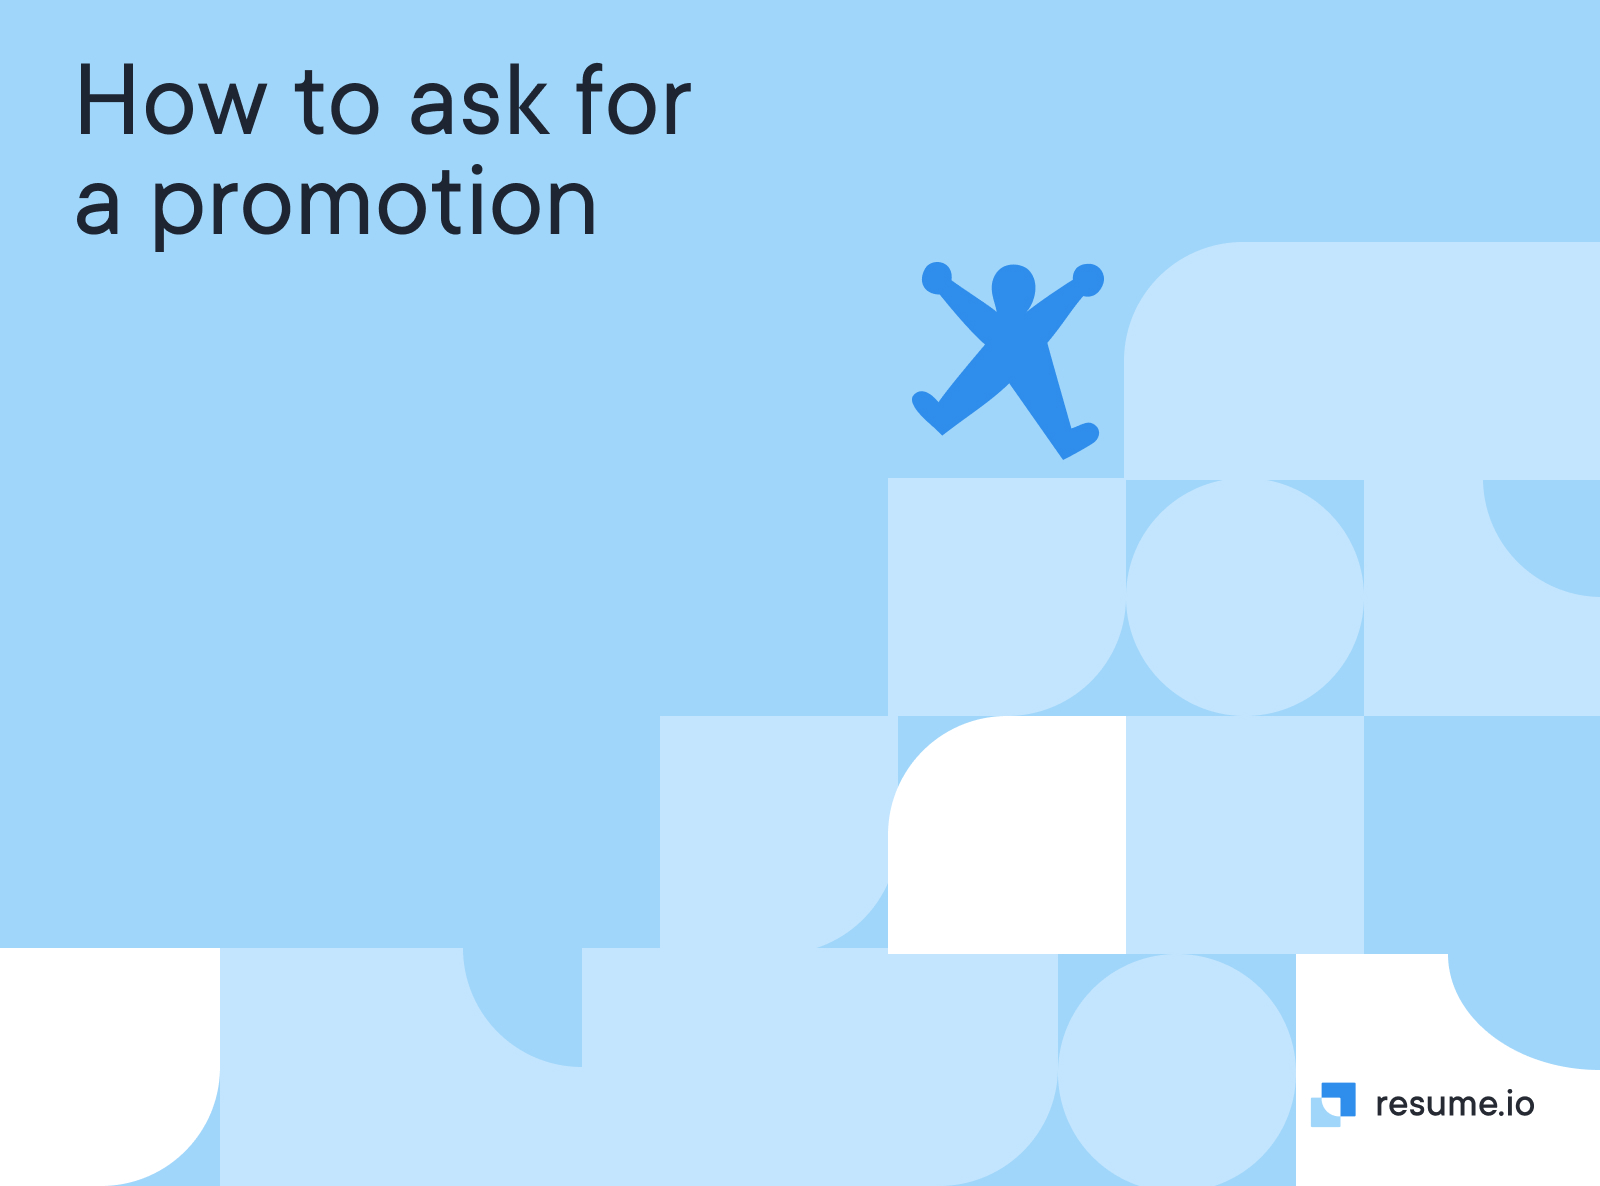 How to ask for a promotion